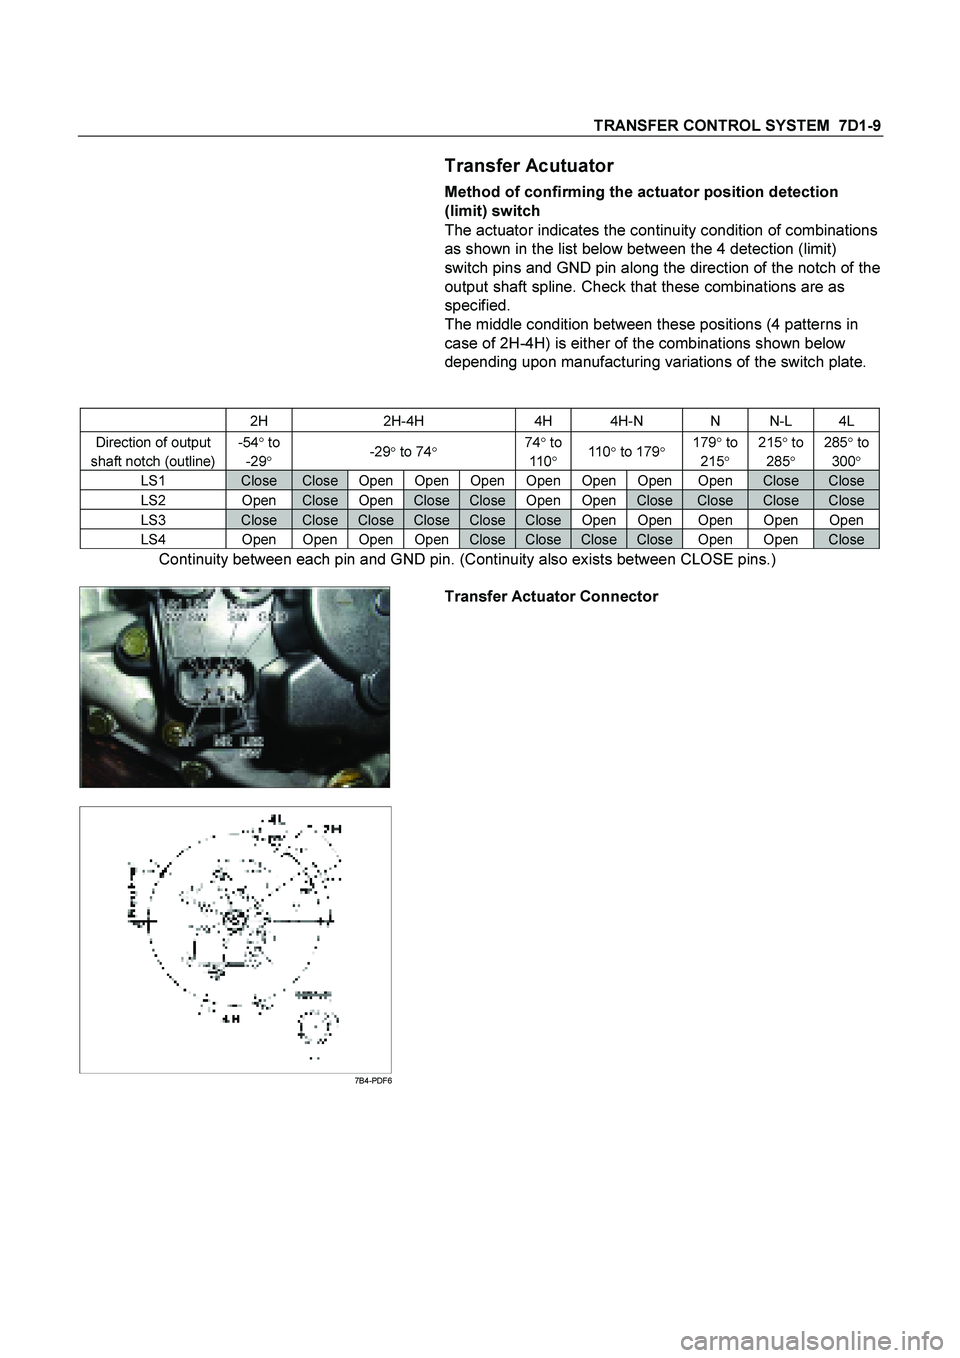 ISUZU TF SERIES 2004  Workshop Manual TRANSFER CONTROL SYSTEM  7D1-9 
   Transfer Acutuator 
Method of confirming the actuator position detection  
(limit) switch  
The actuator indicates the continuity condition of combinations  
as show